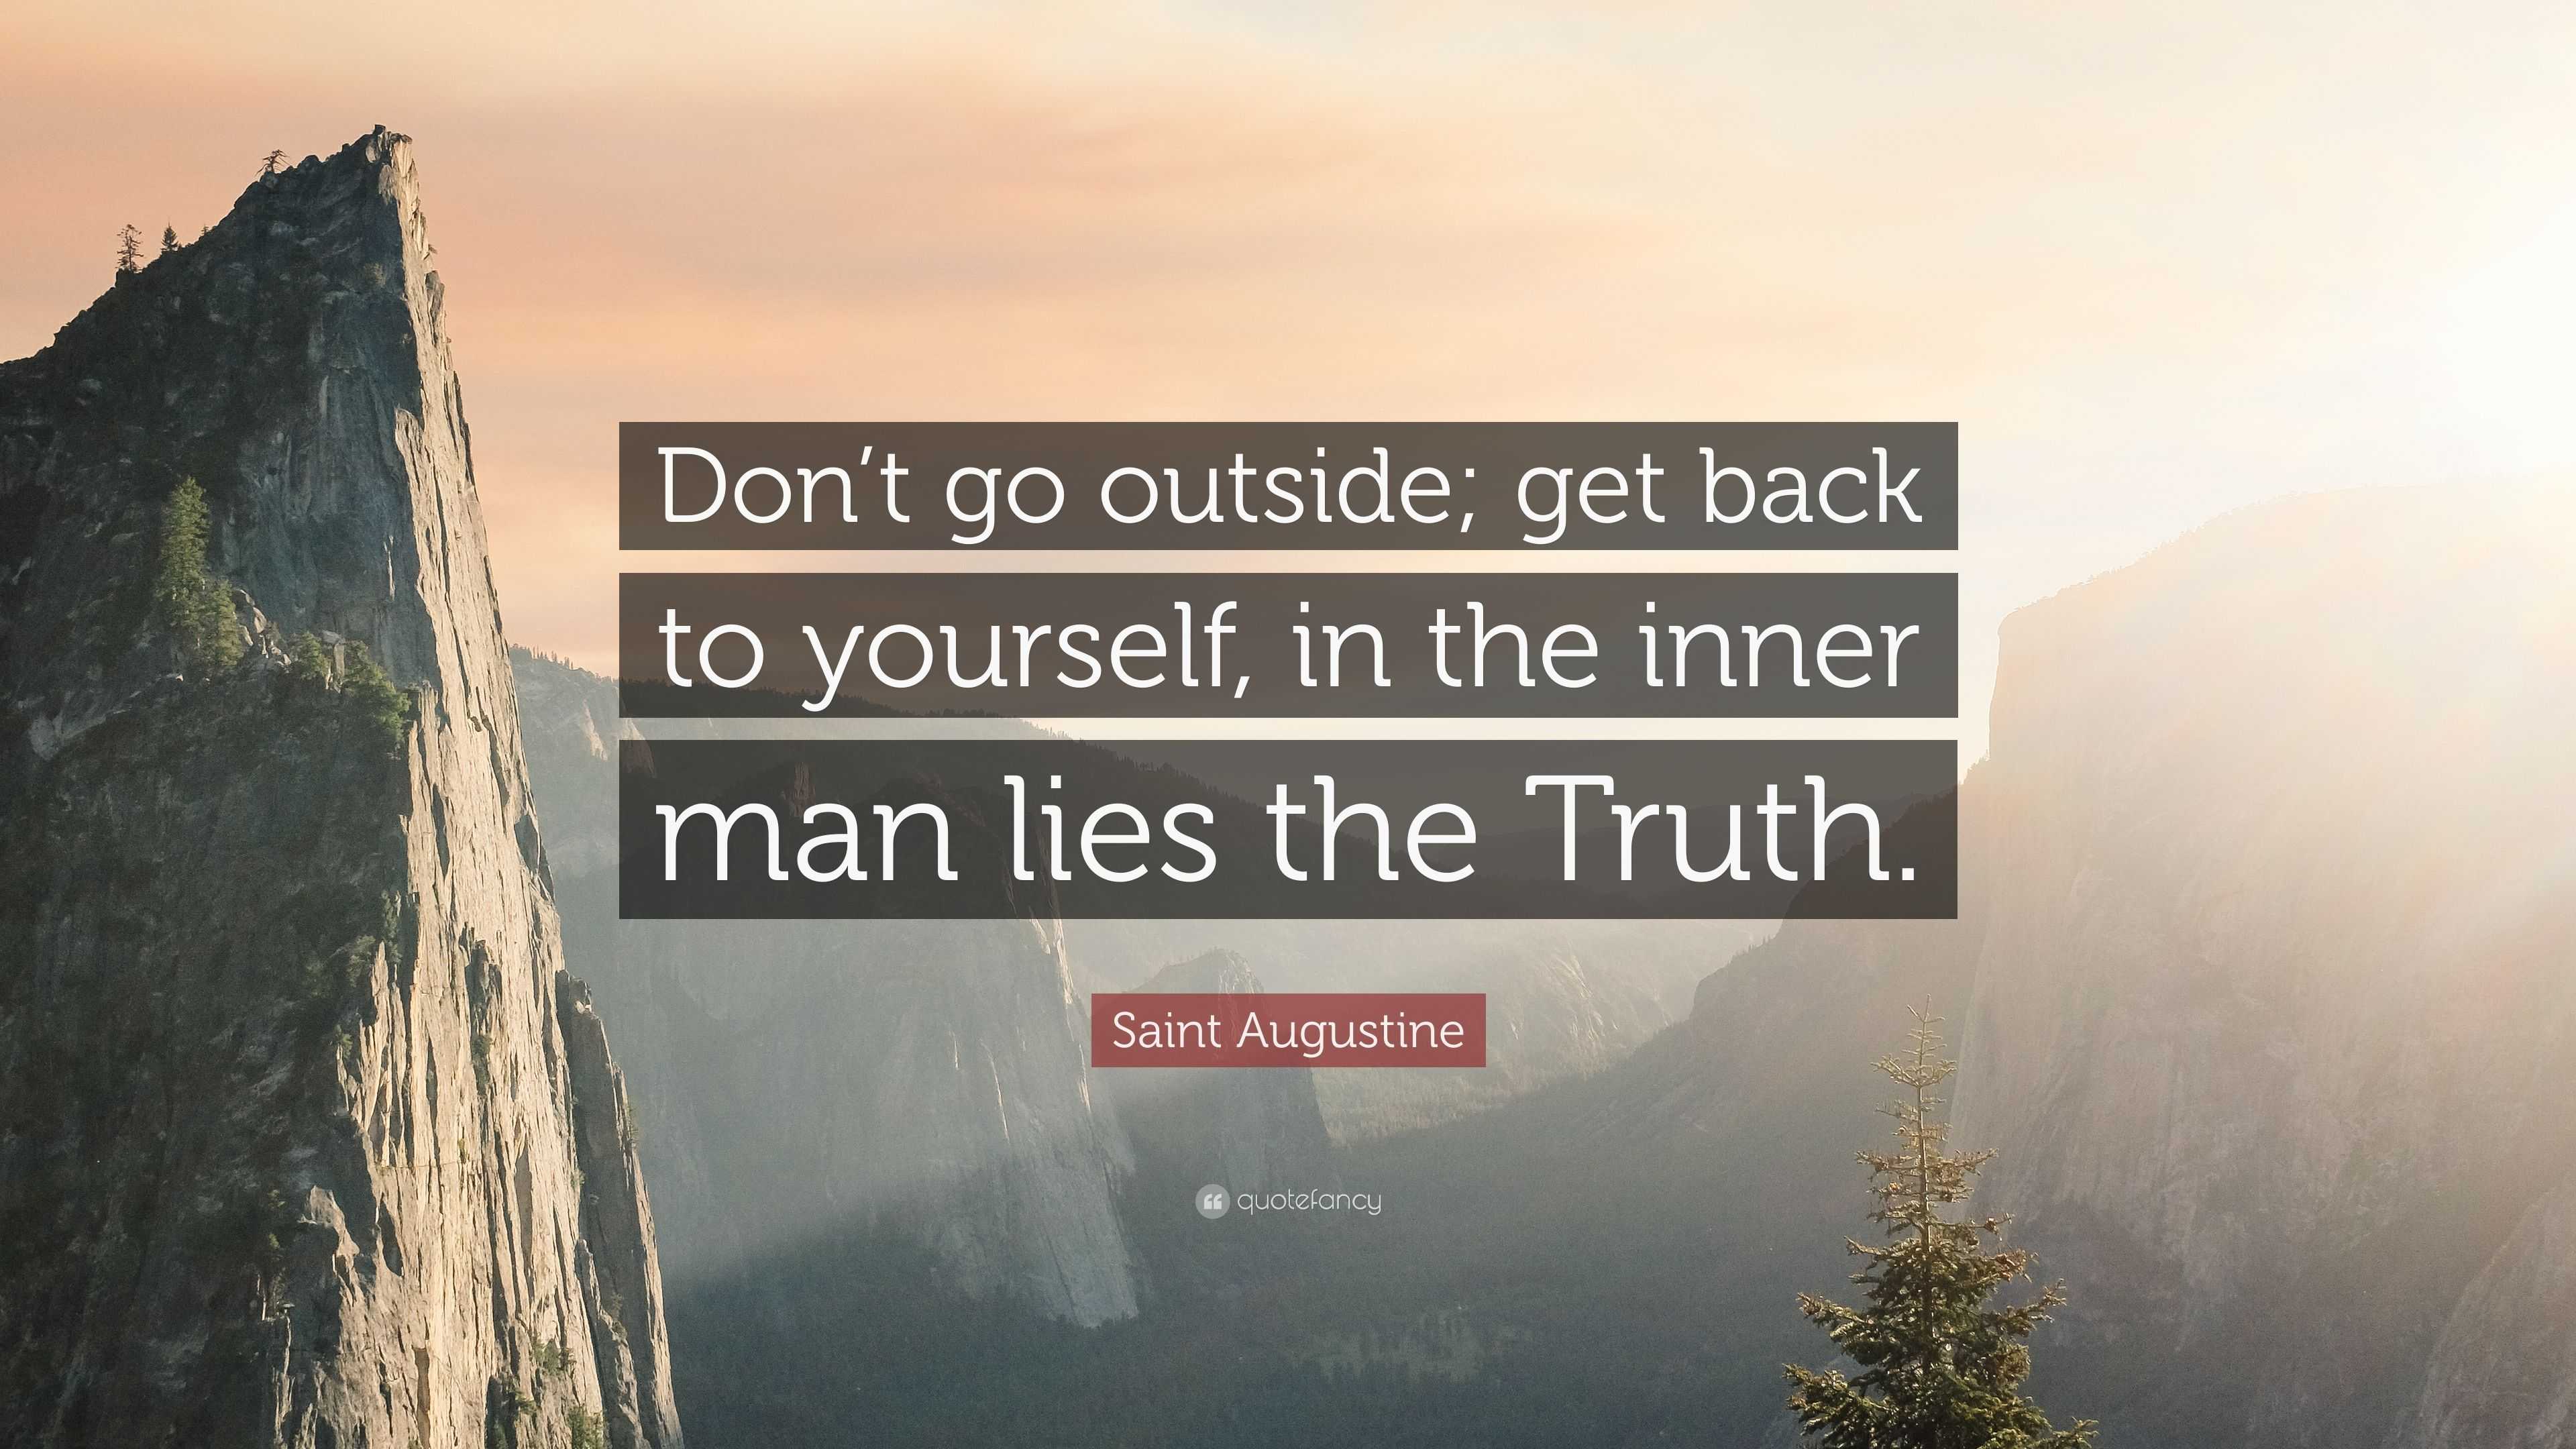 Saint Augustine Quote: "Don't go outside; get back to ...